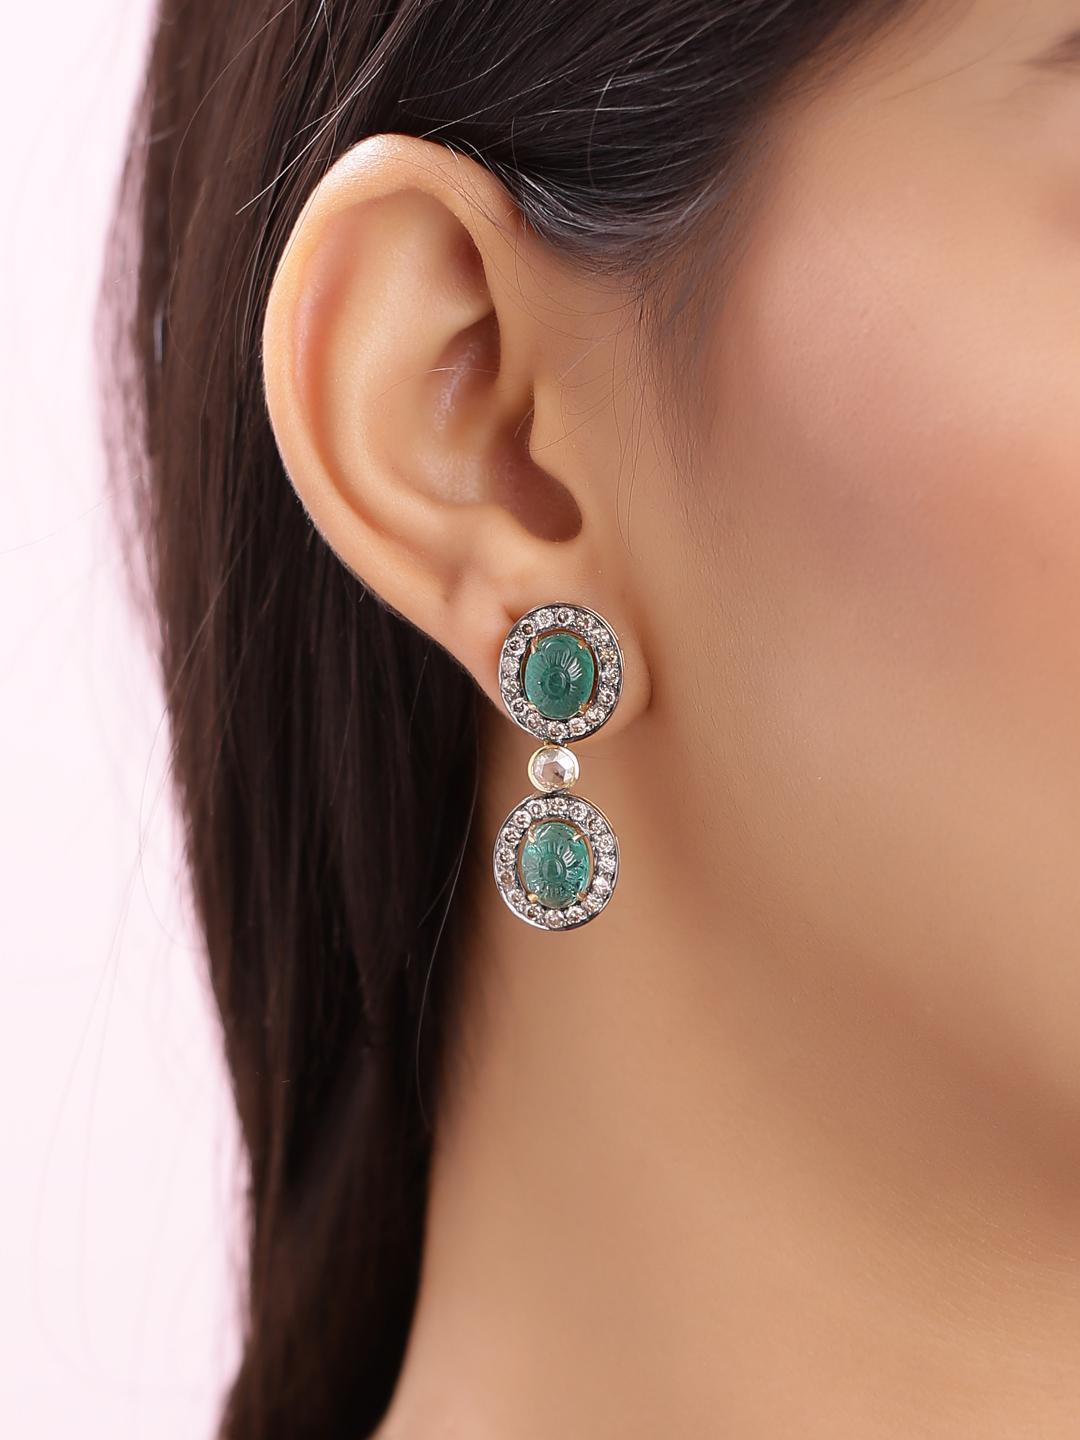 Art Deco Hand Carved Emerald Earrings with Diamonds Handcrafted in 18 Karat Gold For Sale